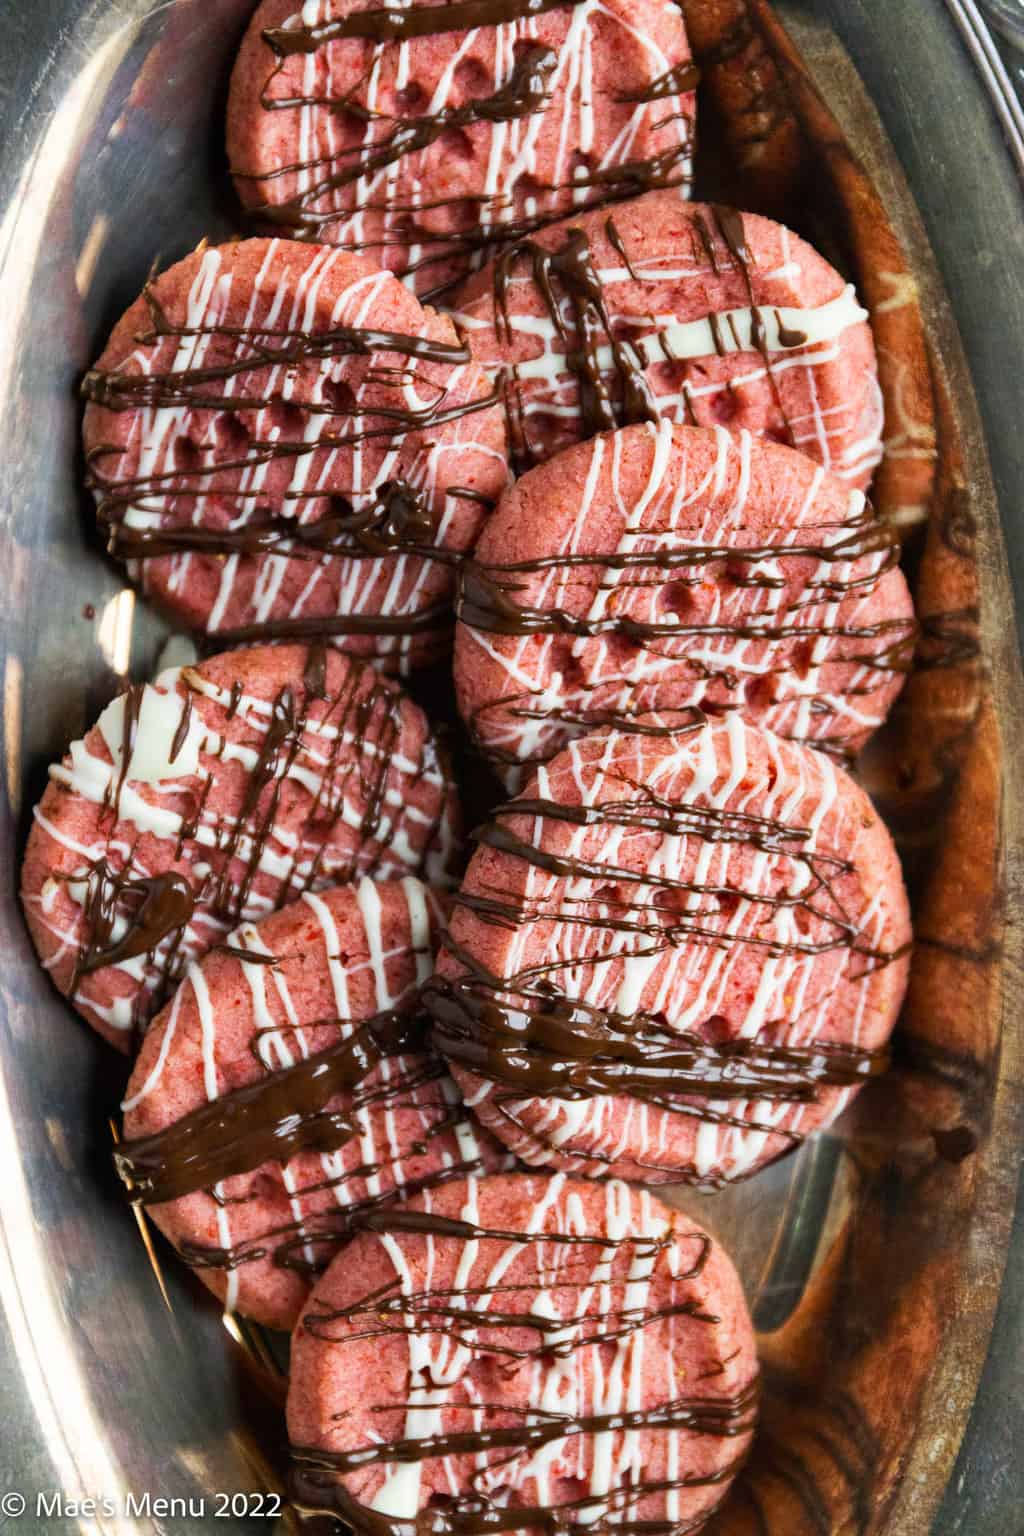 A serving platter of strawberry shortbread cookies.